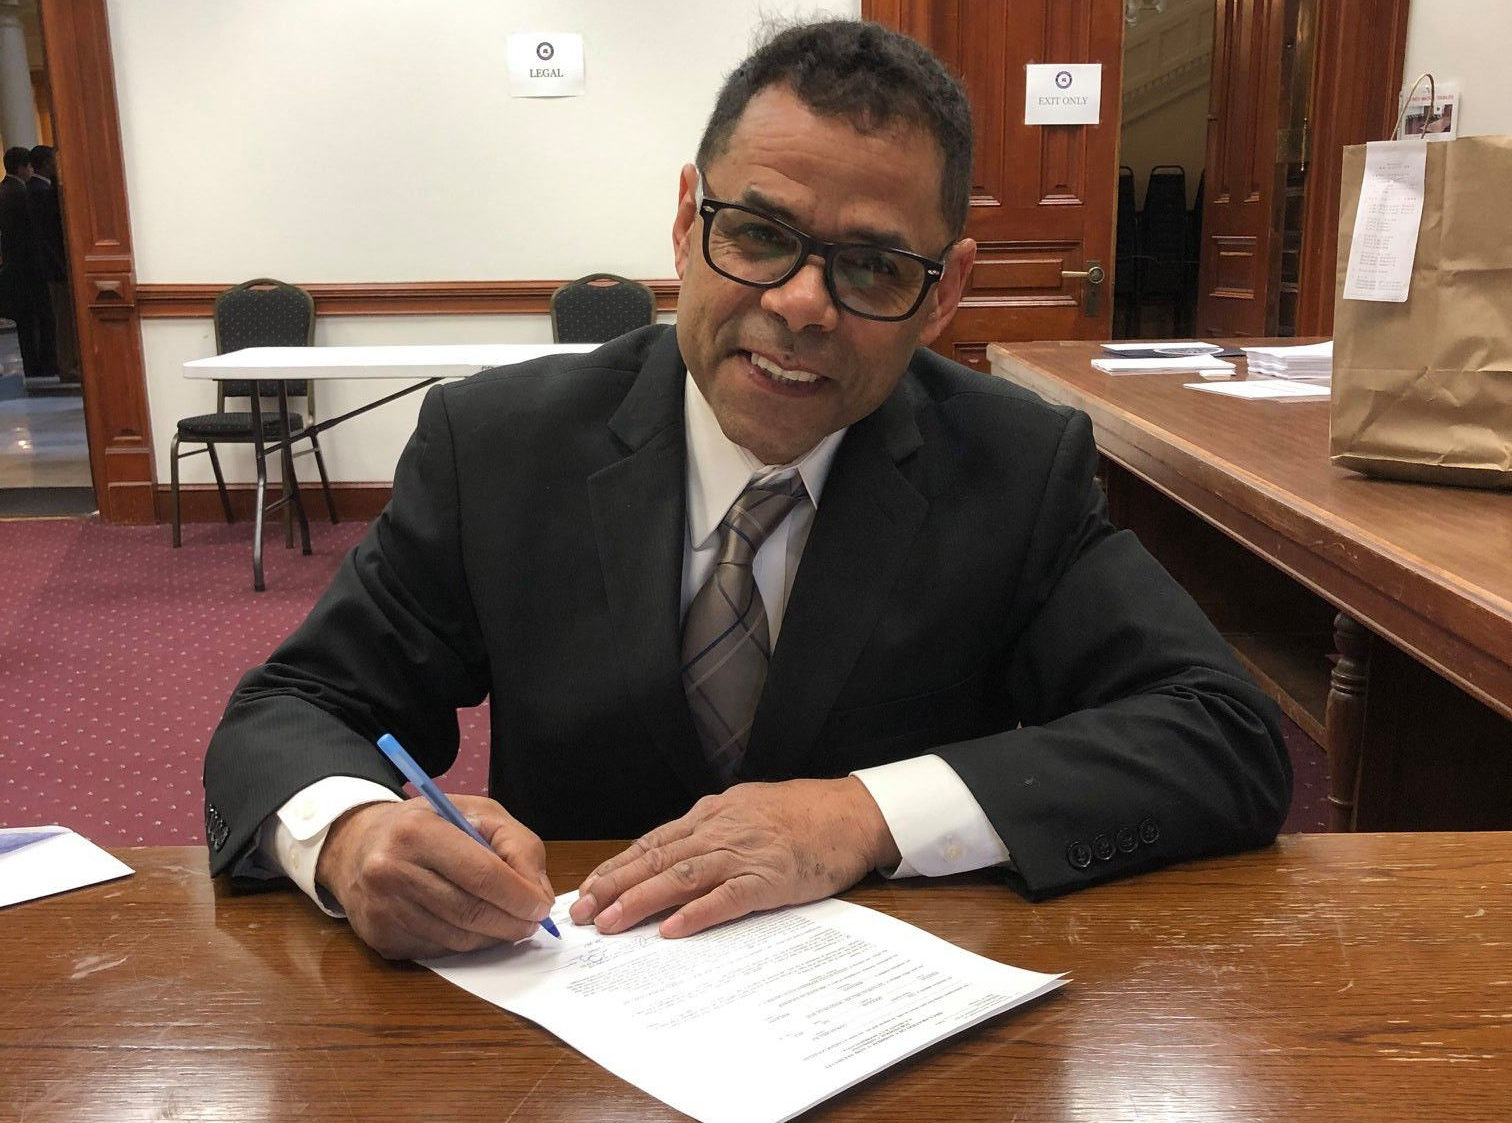 Caesar Gonzales signing the paperwork to seek election to the U.S. Congress. Photo courtesy of Caesar Gonzales.